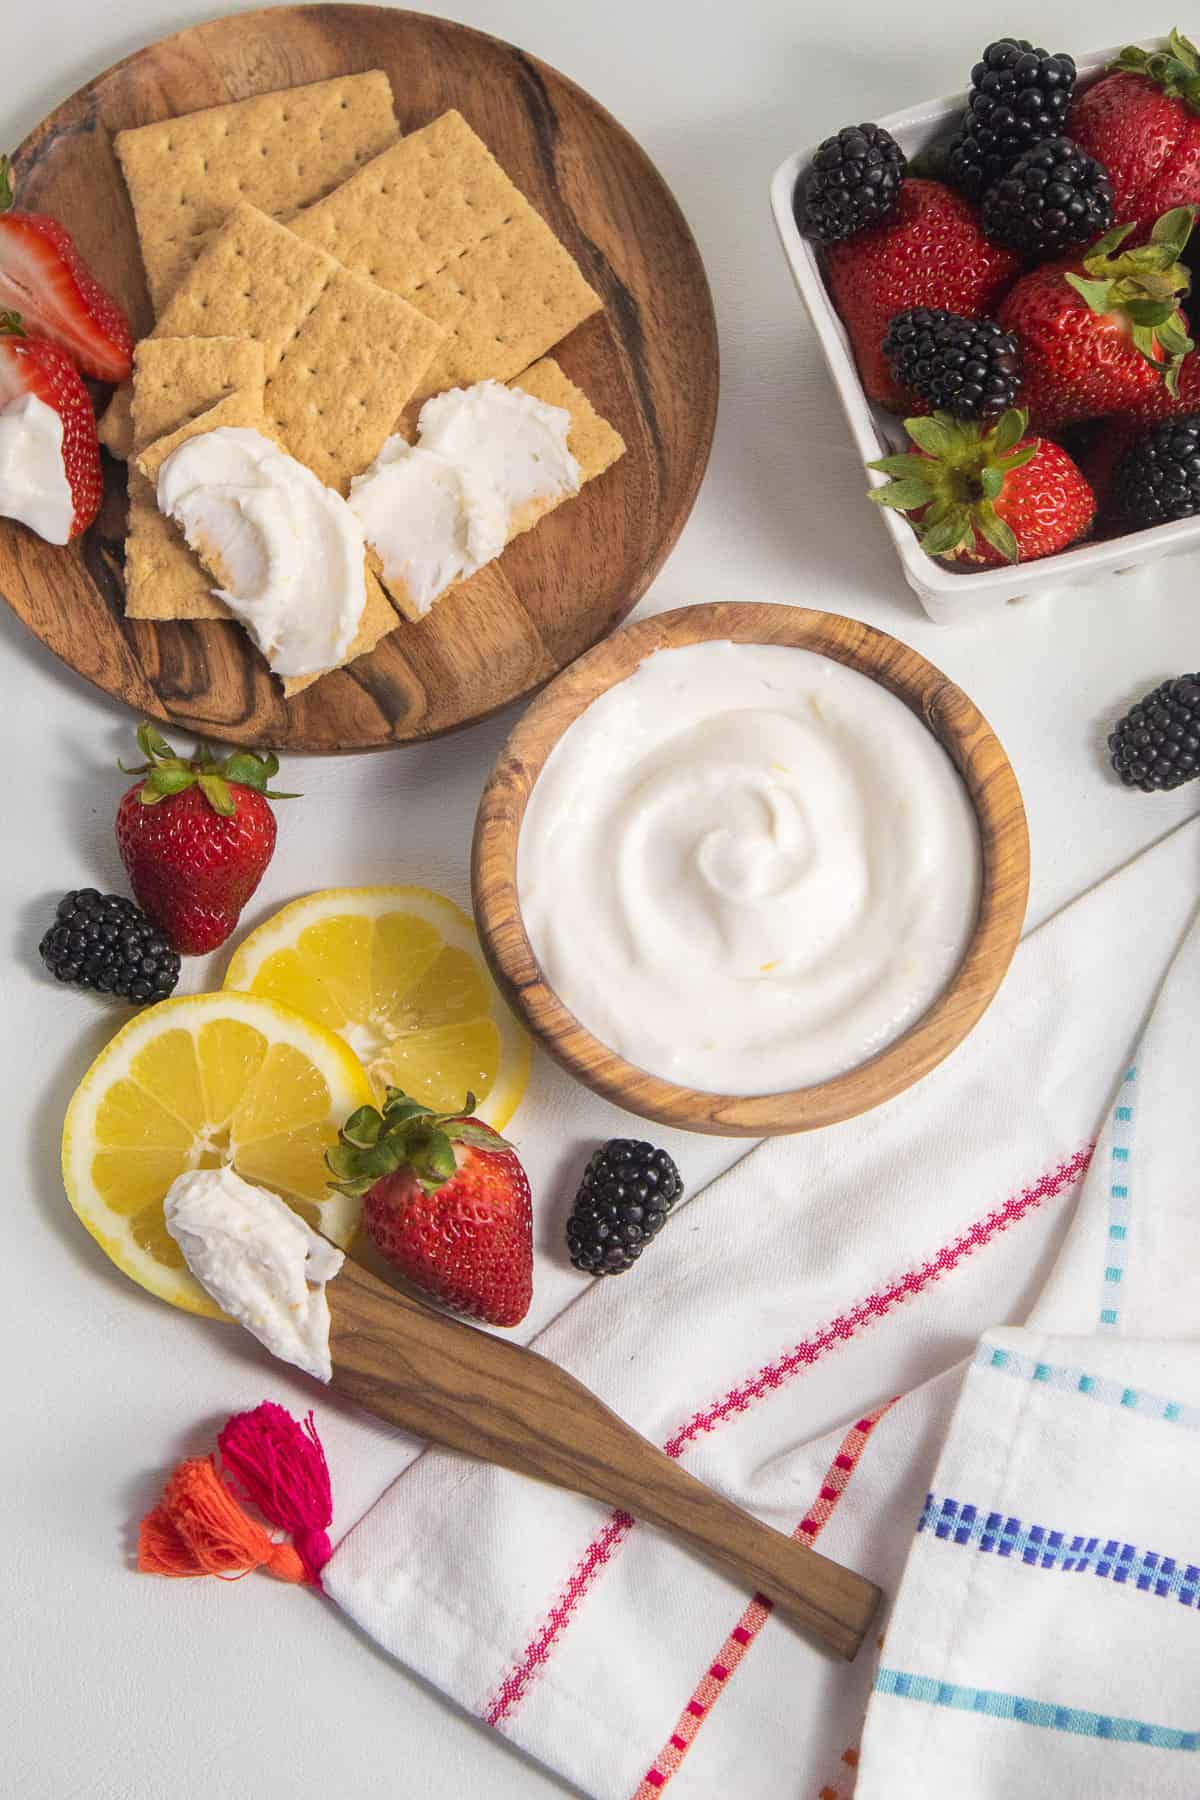 The fruit dip in a wooden bowl sits at the center of the image surrounded by fresh berries, lemon slices, and graham crackers.